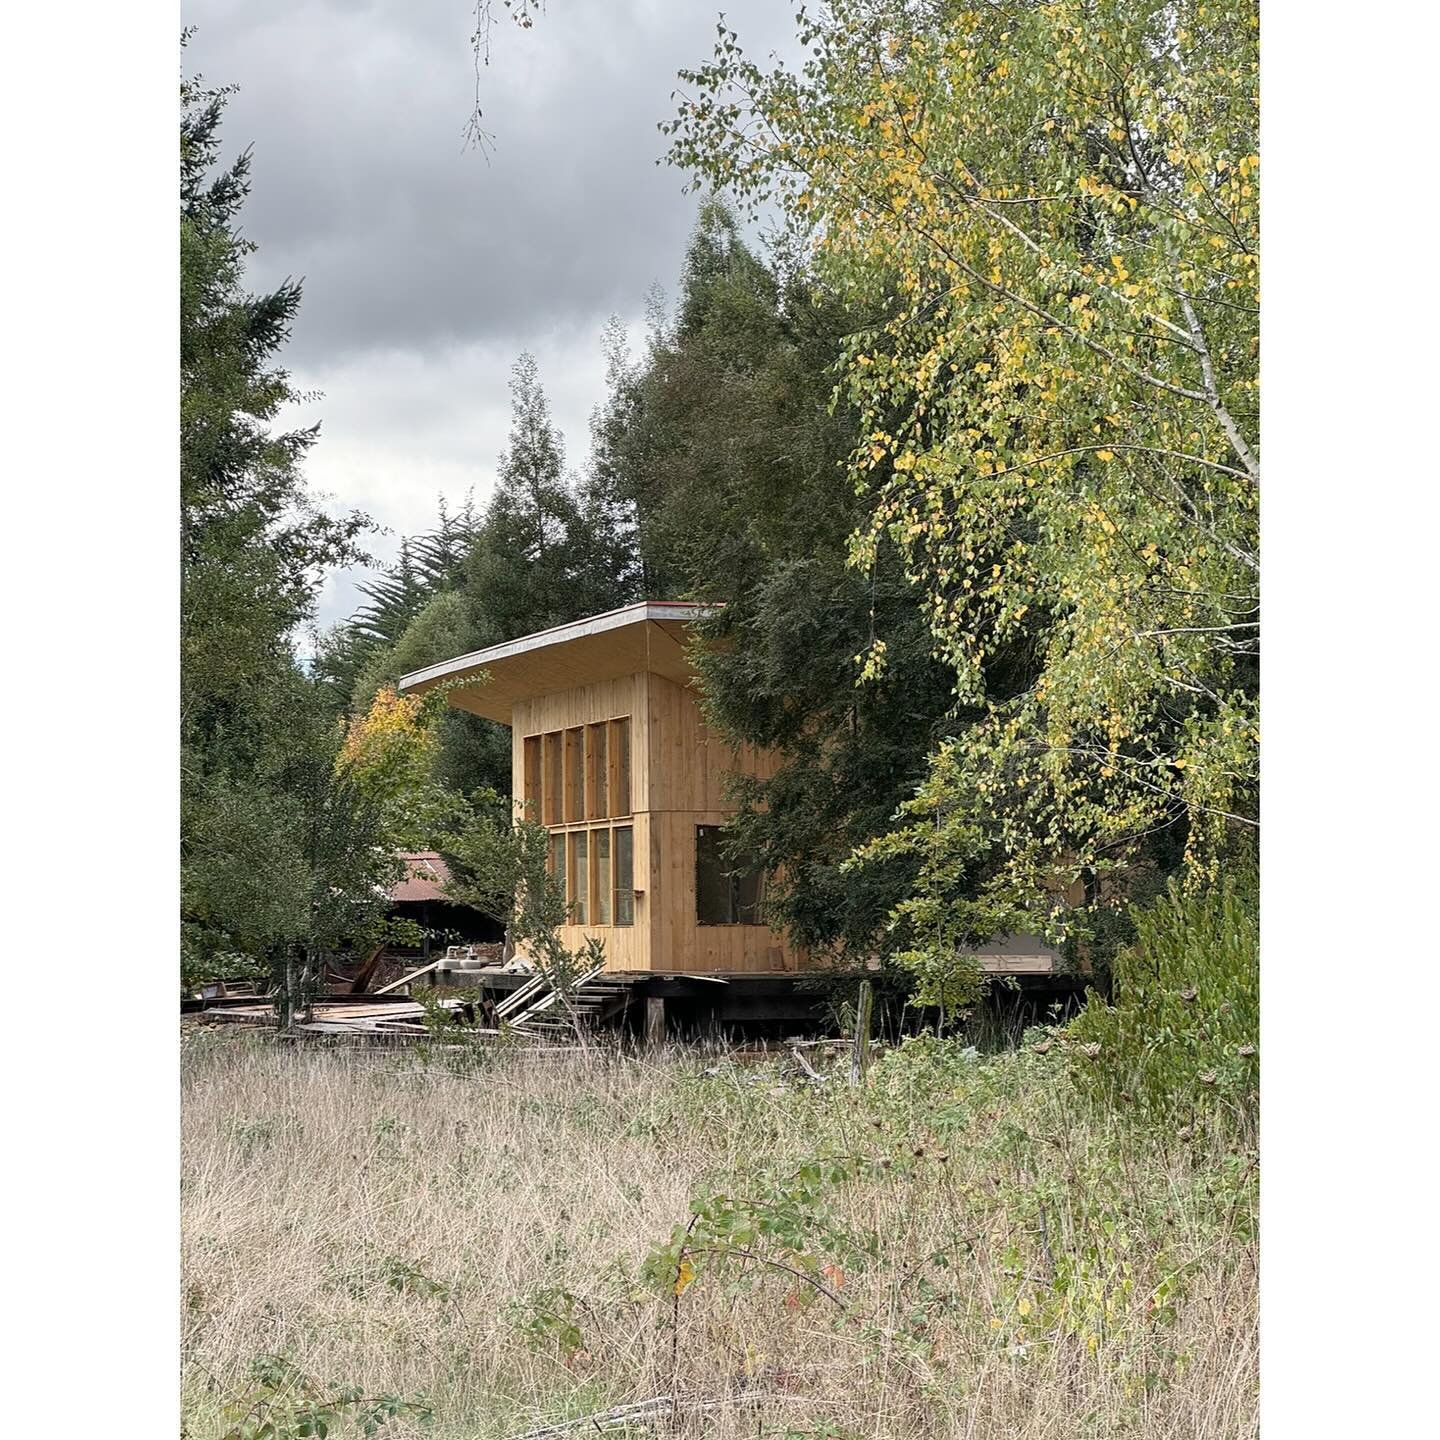 AY. El Liuco, Gorbea, Chile
Casa Donguil - Site progress
.
.
.
#ampueroyutronic #timberarchitecture #rural #realestate #architecture #smallprojects #arquitecturaenmadera #arquitecturachilena #timberconstruction #sustainability #sustainableconstructio